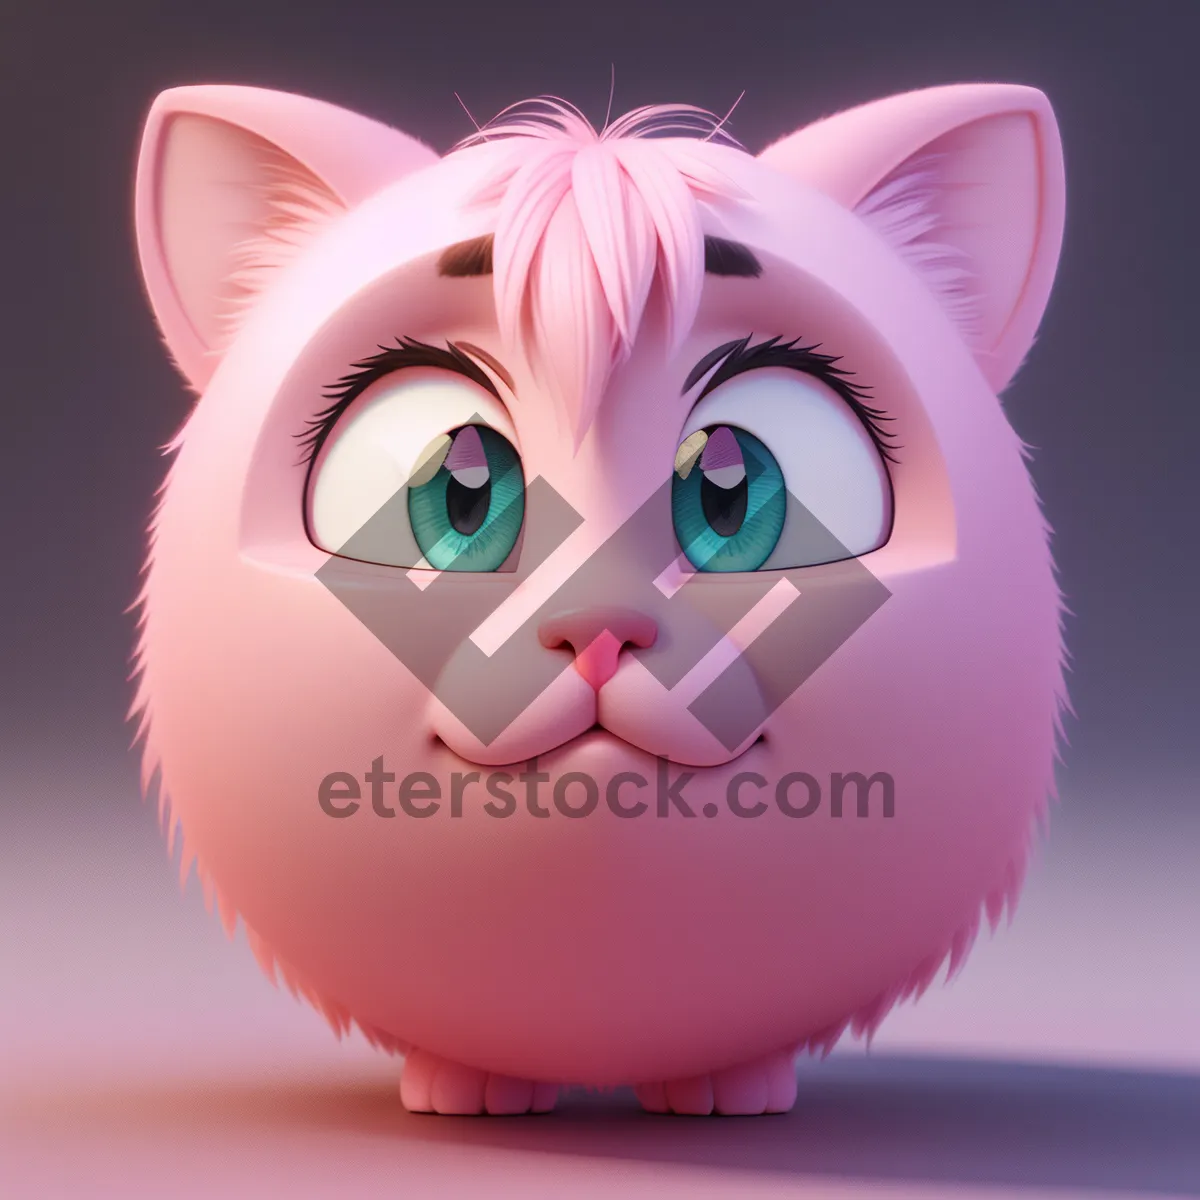 Picture of Adorable Piggy Bank for Savings and Investments